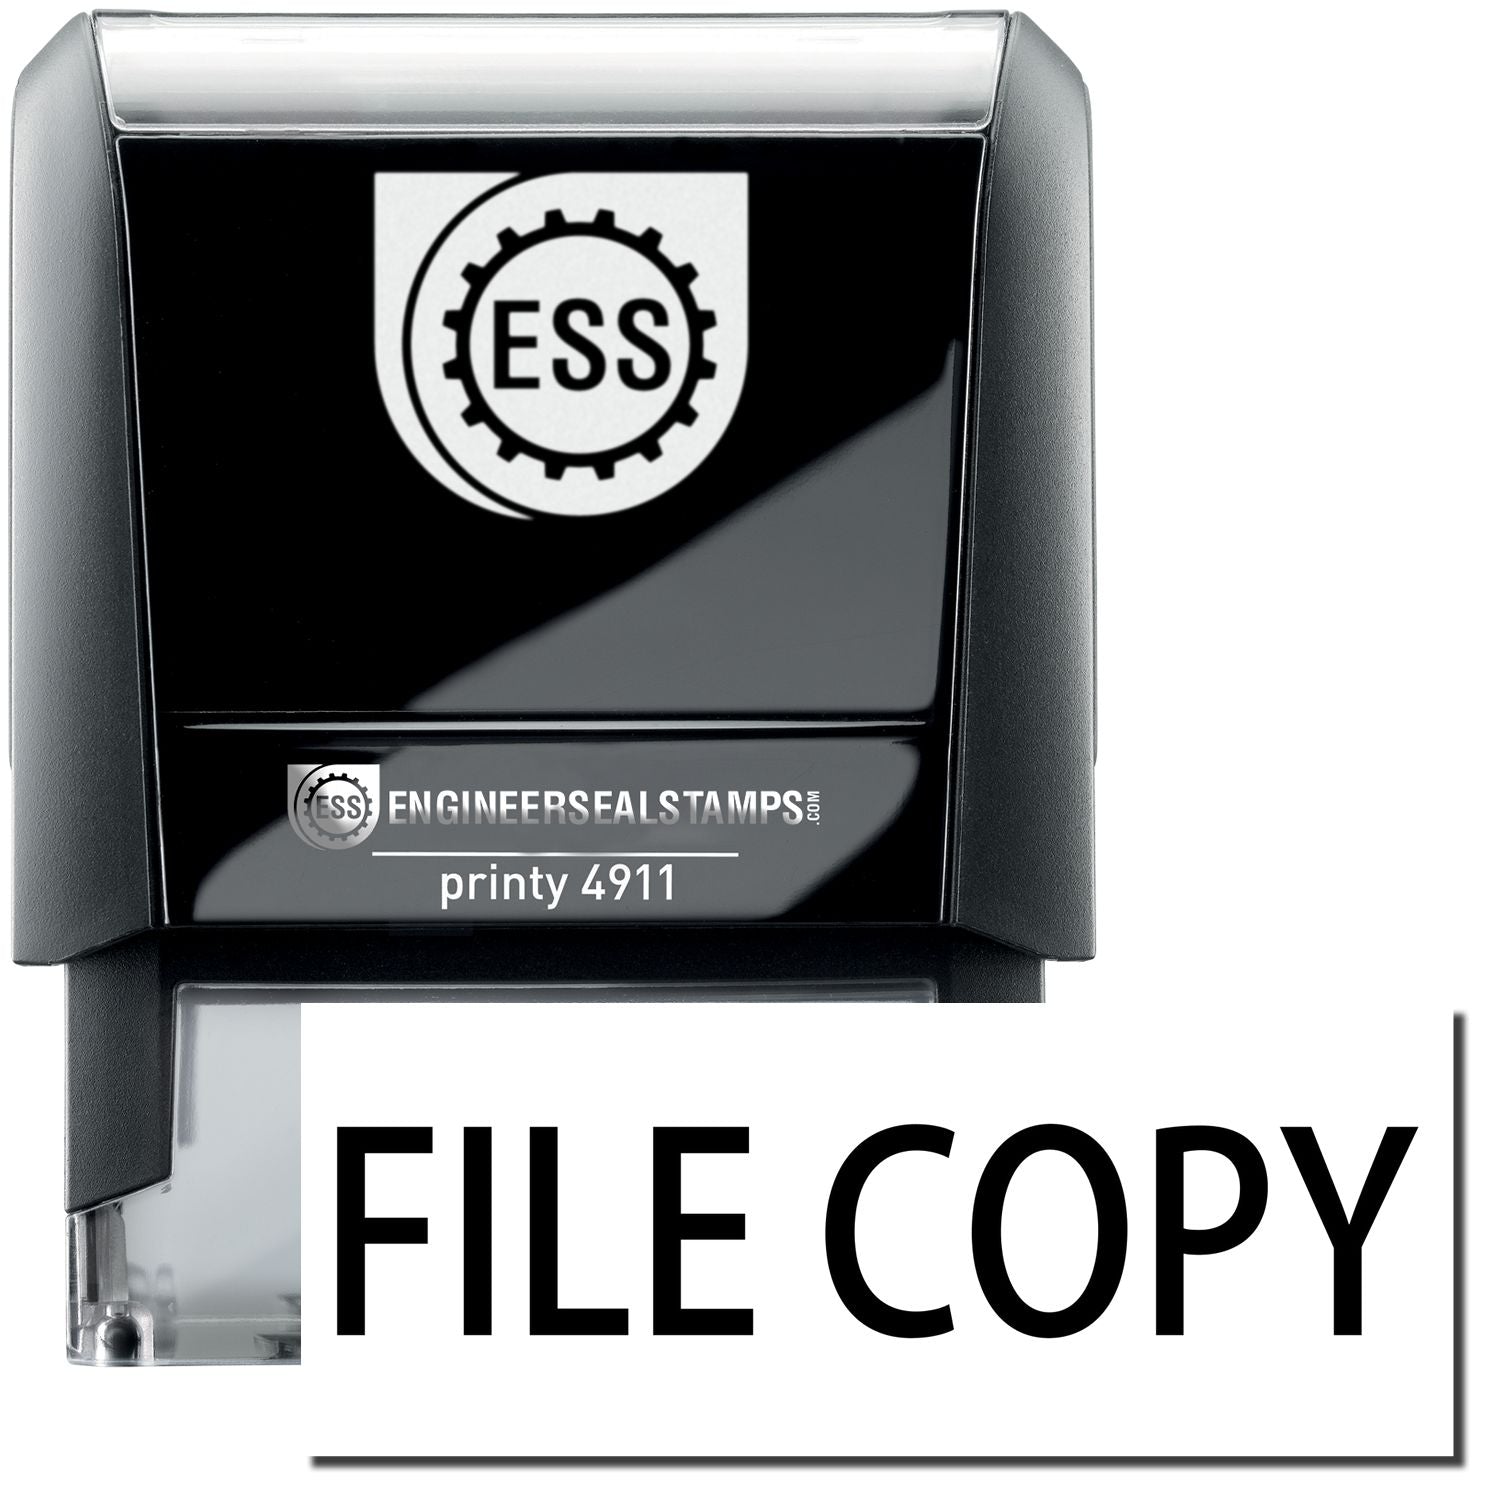 A self-inking stamp with a stamped image showing how the text "FILE COPY" is displayed after stamping.